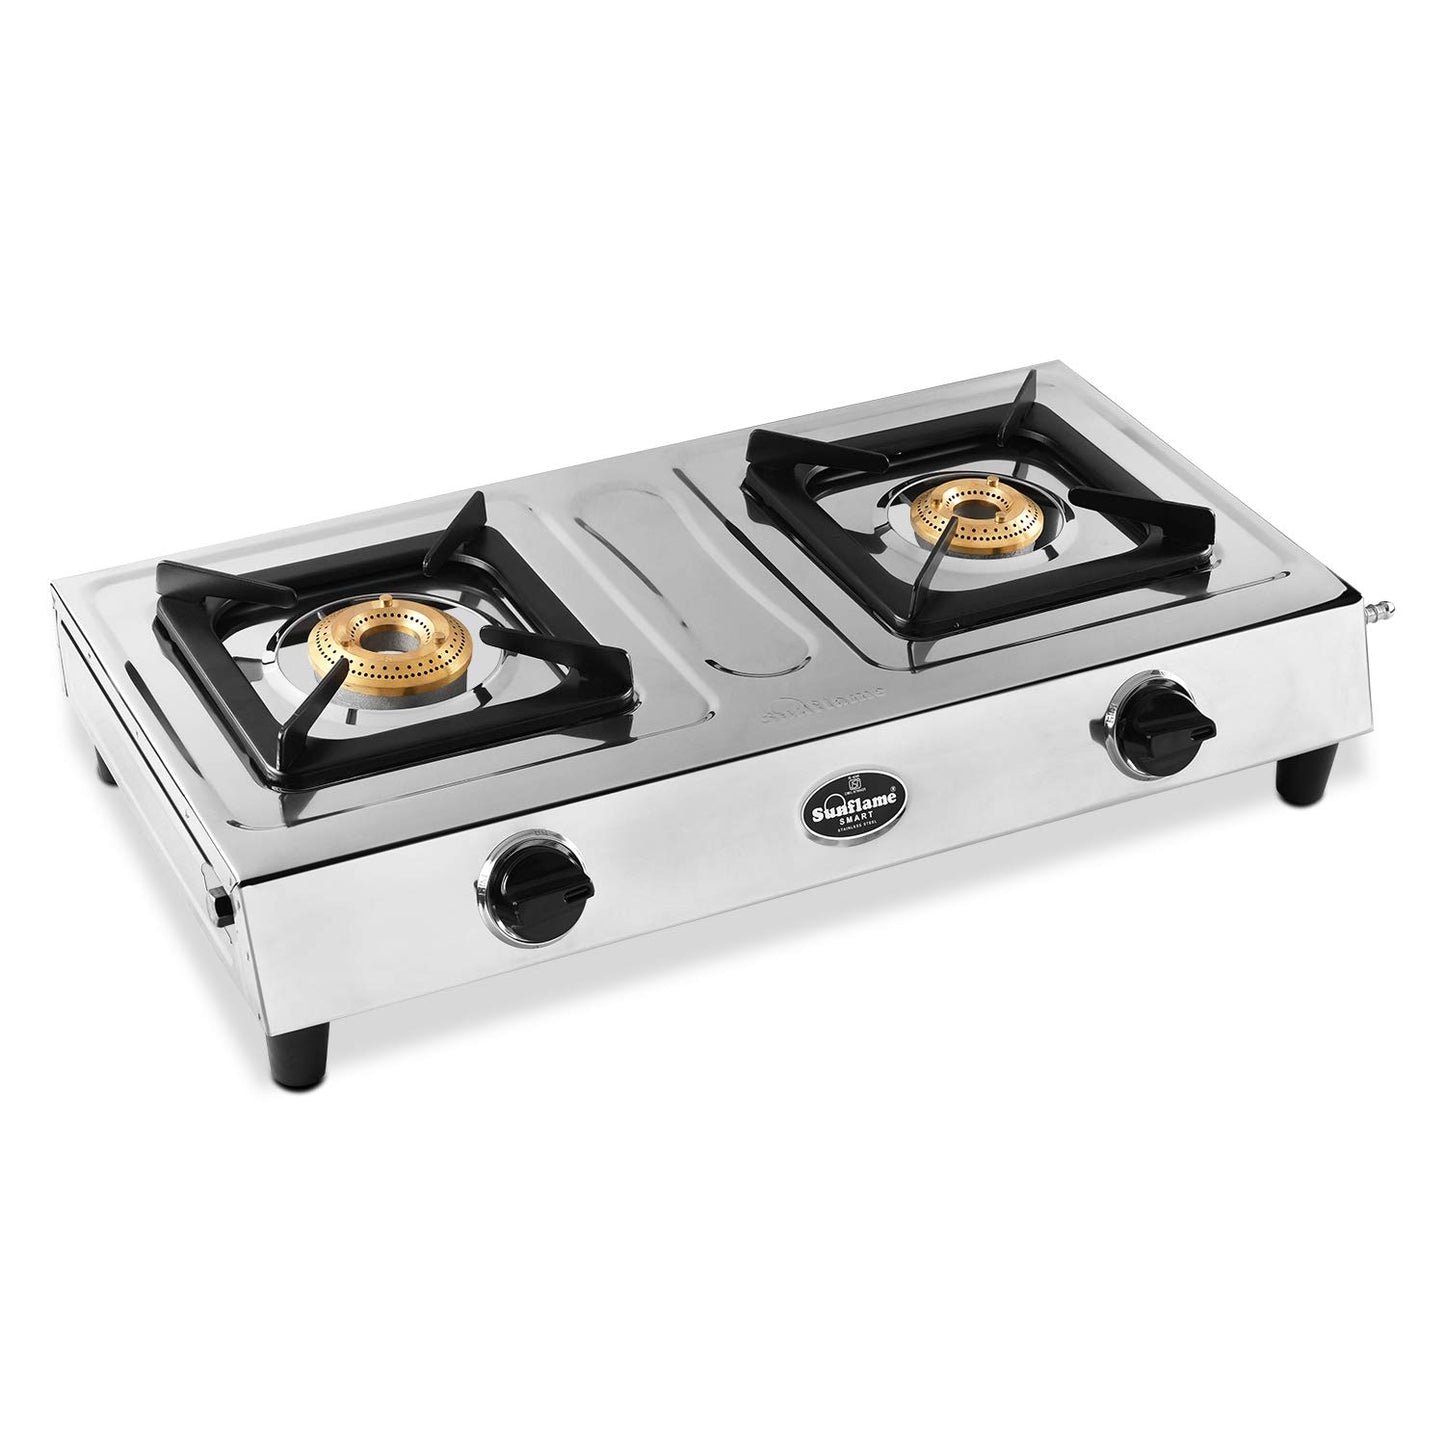 Sunflame 2B - Stainless Steel 2 Burner Gas Stove (Manual Ignition, 2 Brass Burners, Silver)